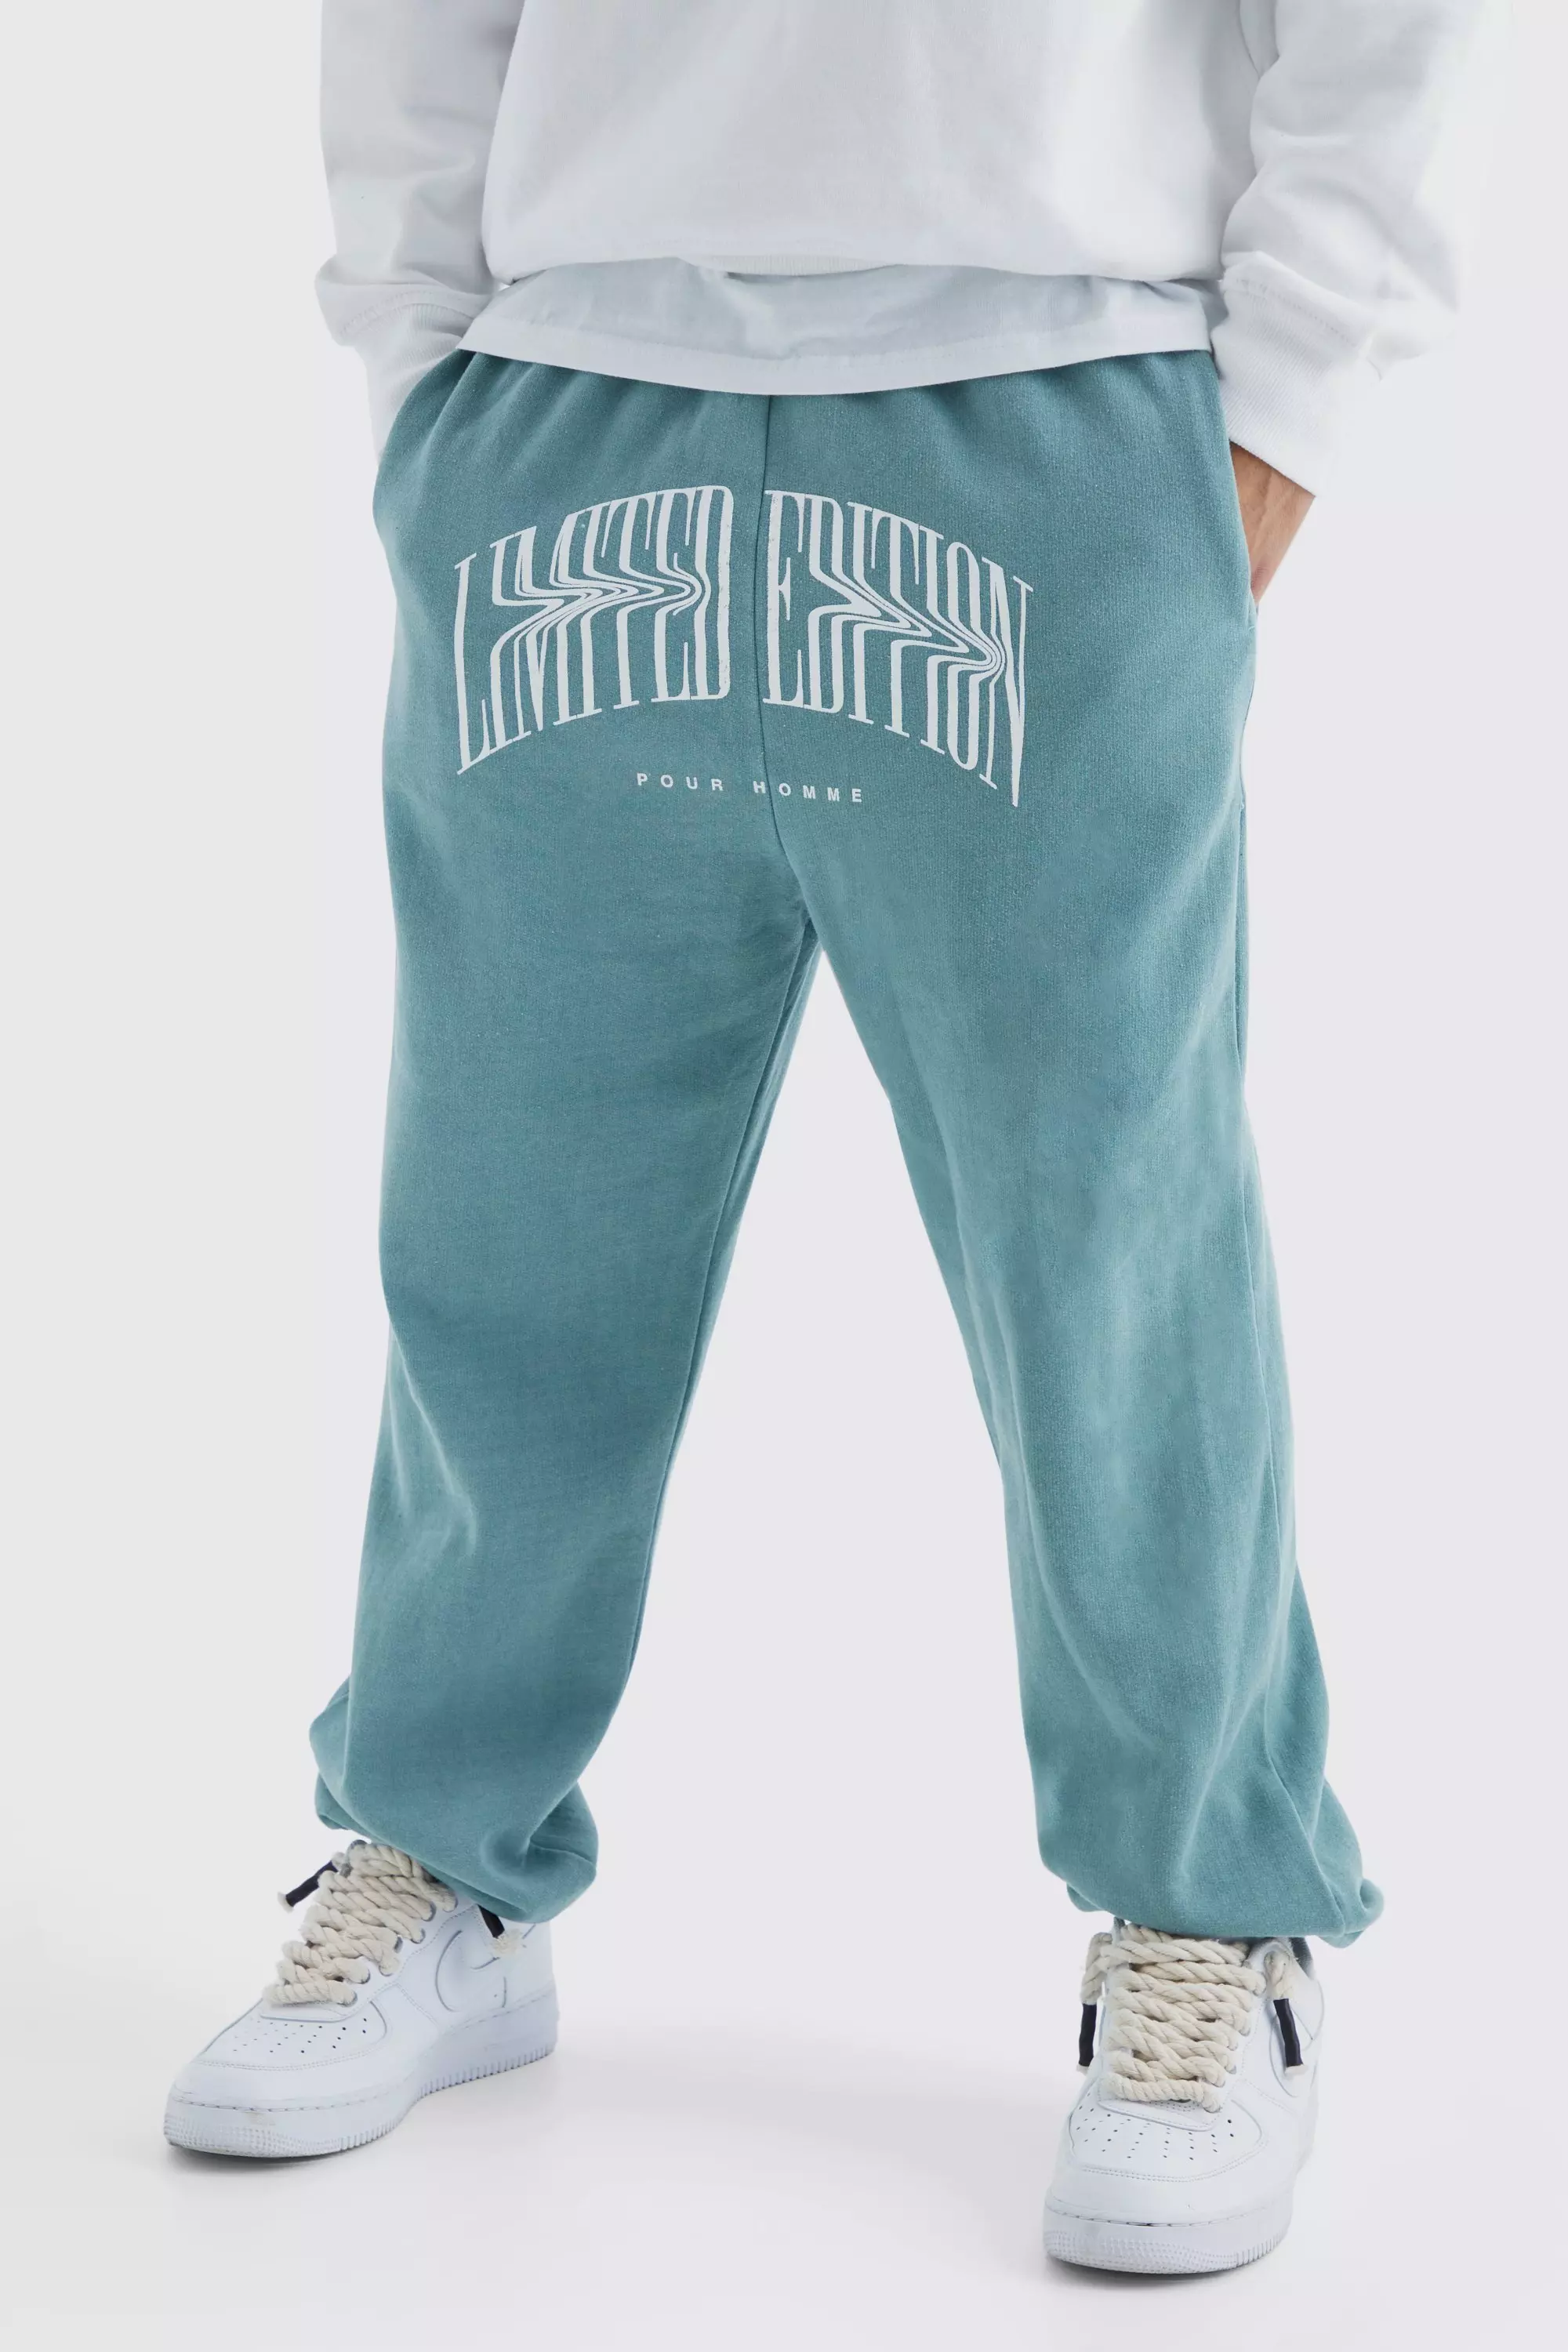 Oversized Limited Crotch Graphic Sweatpants